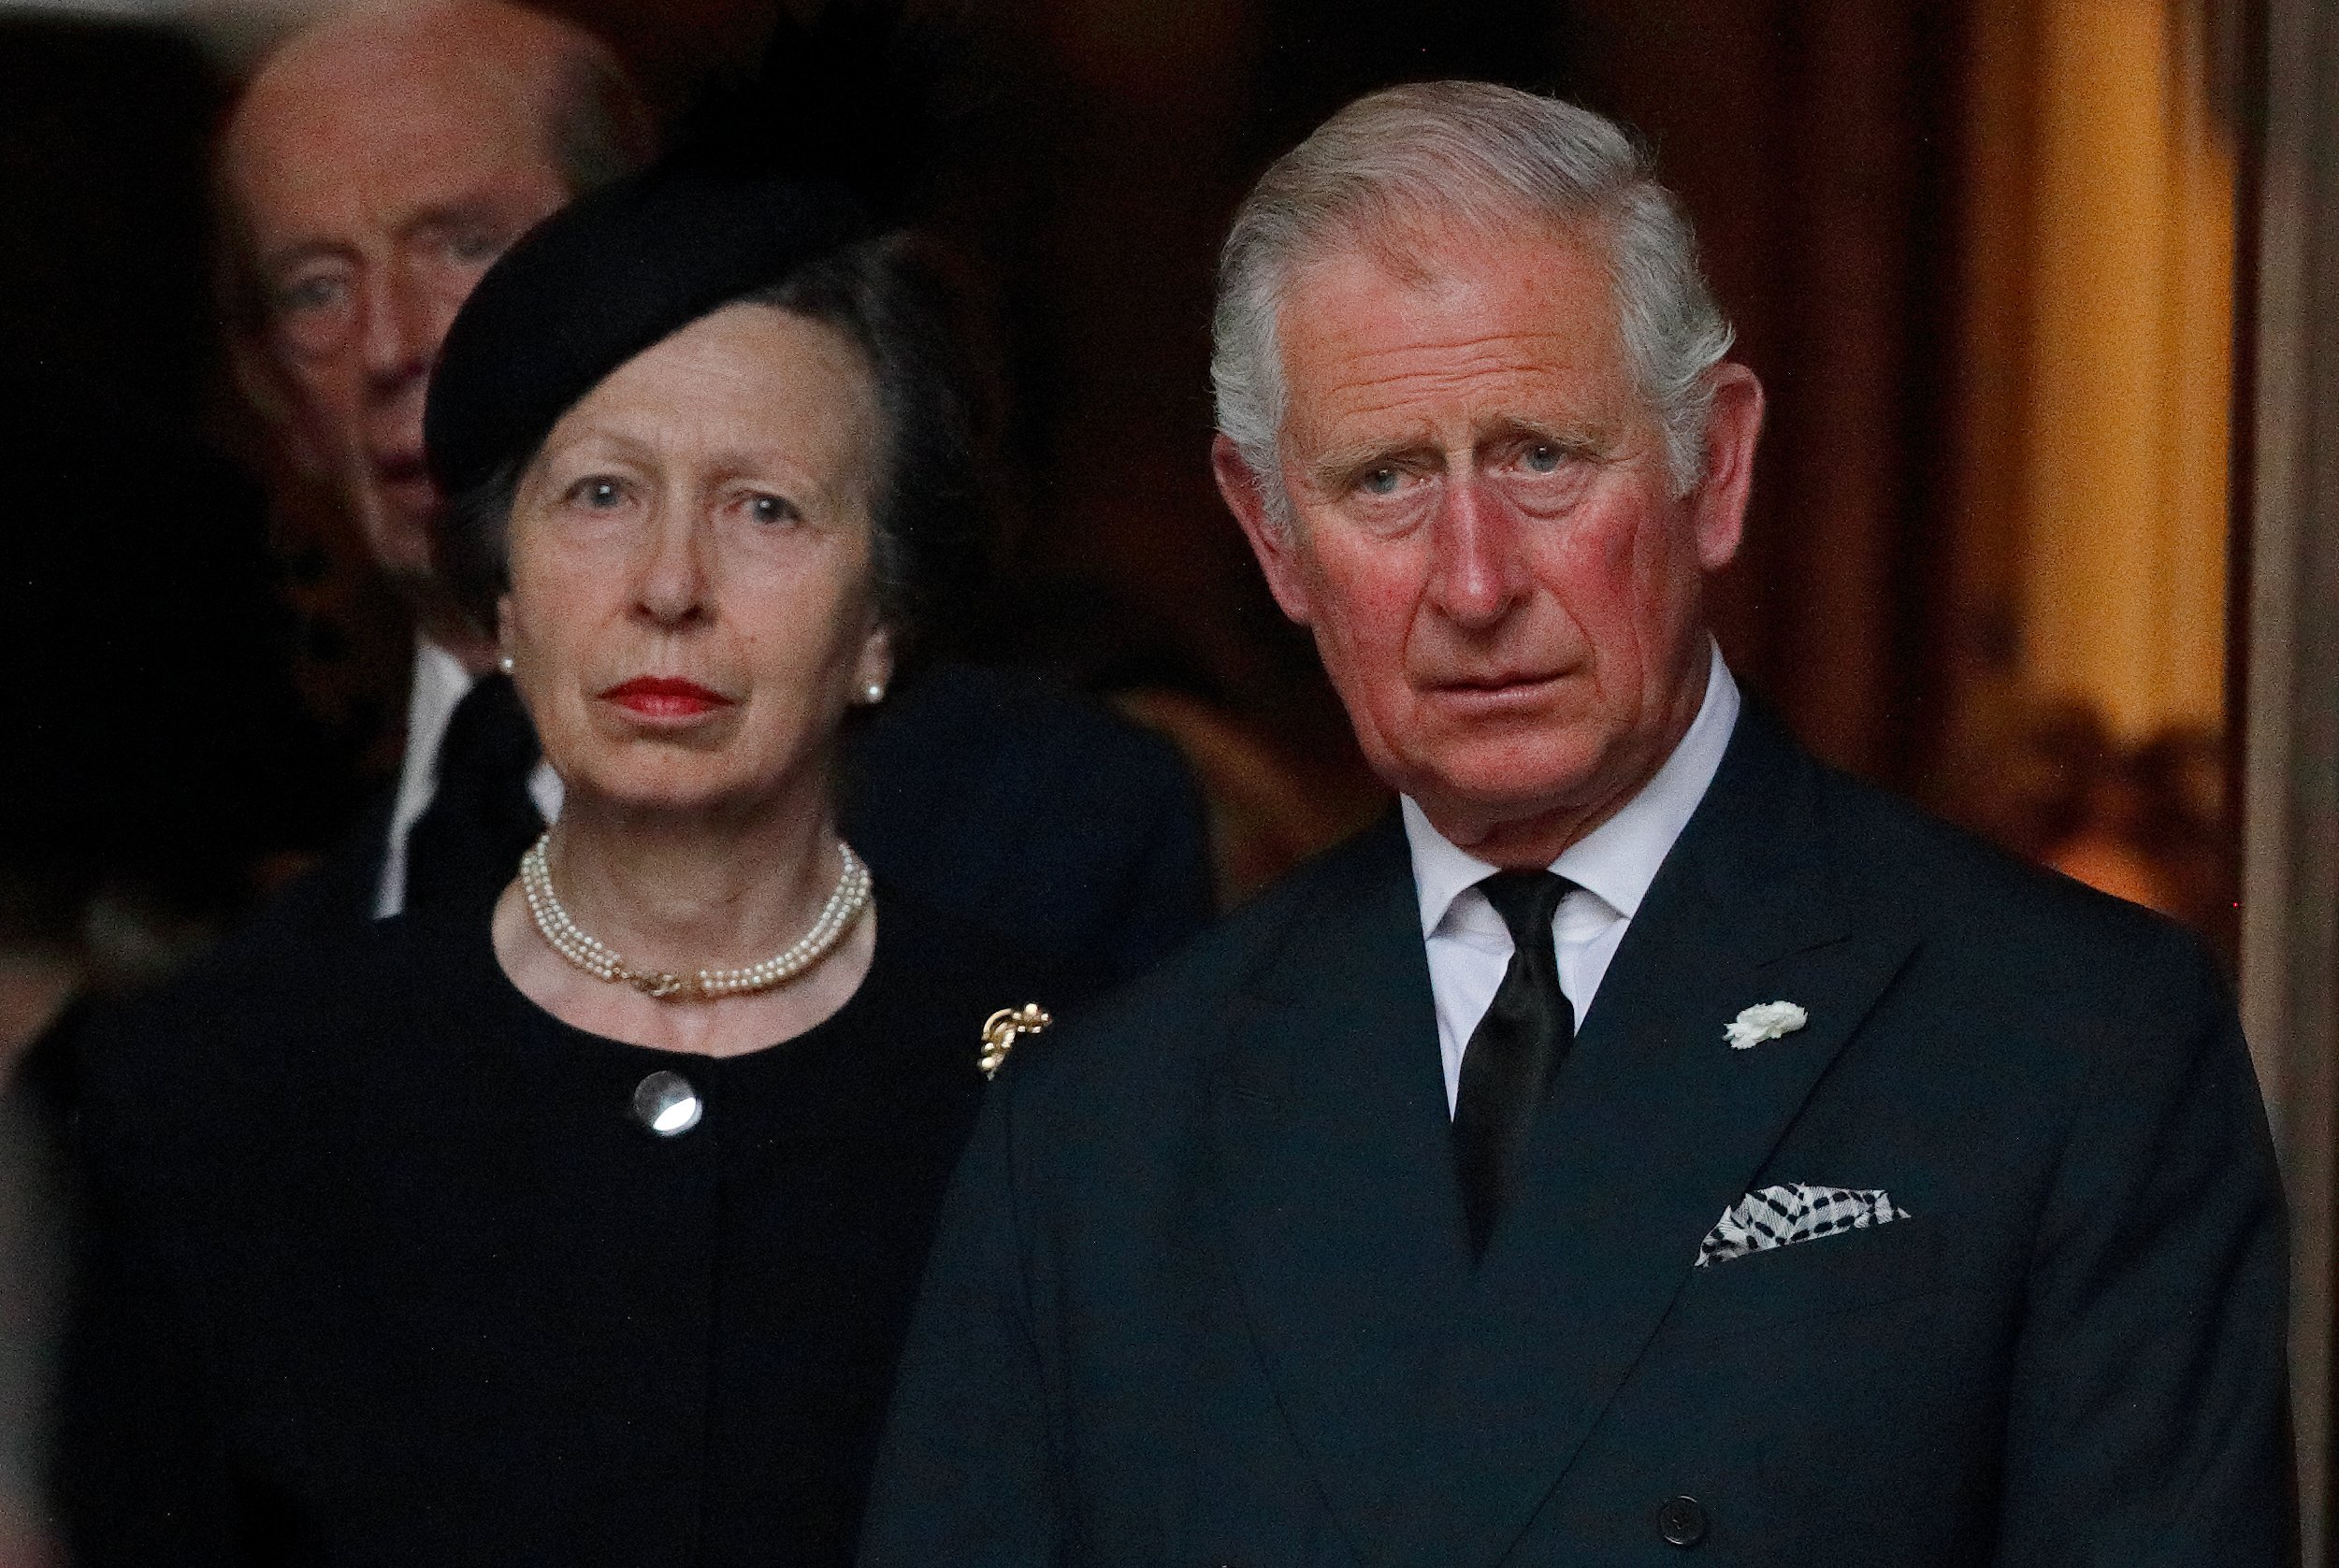 Princess Anne and Prince Charles at the funeral of Patricia Knatchbull, Countess Mountbatten of Burma, at St Paul's Church, Knightsbridge, on June 27, 2017, in London, England | Source: Getty Images